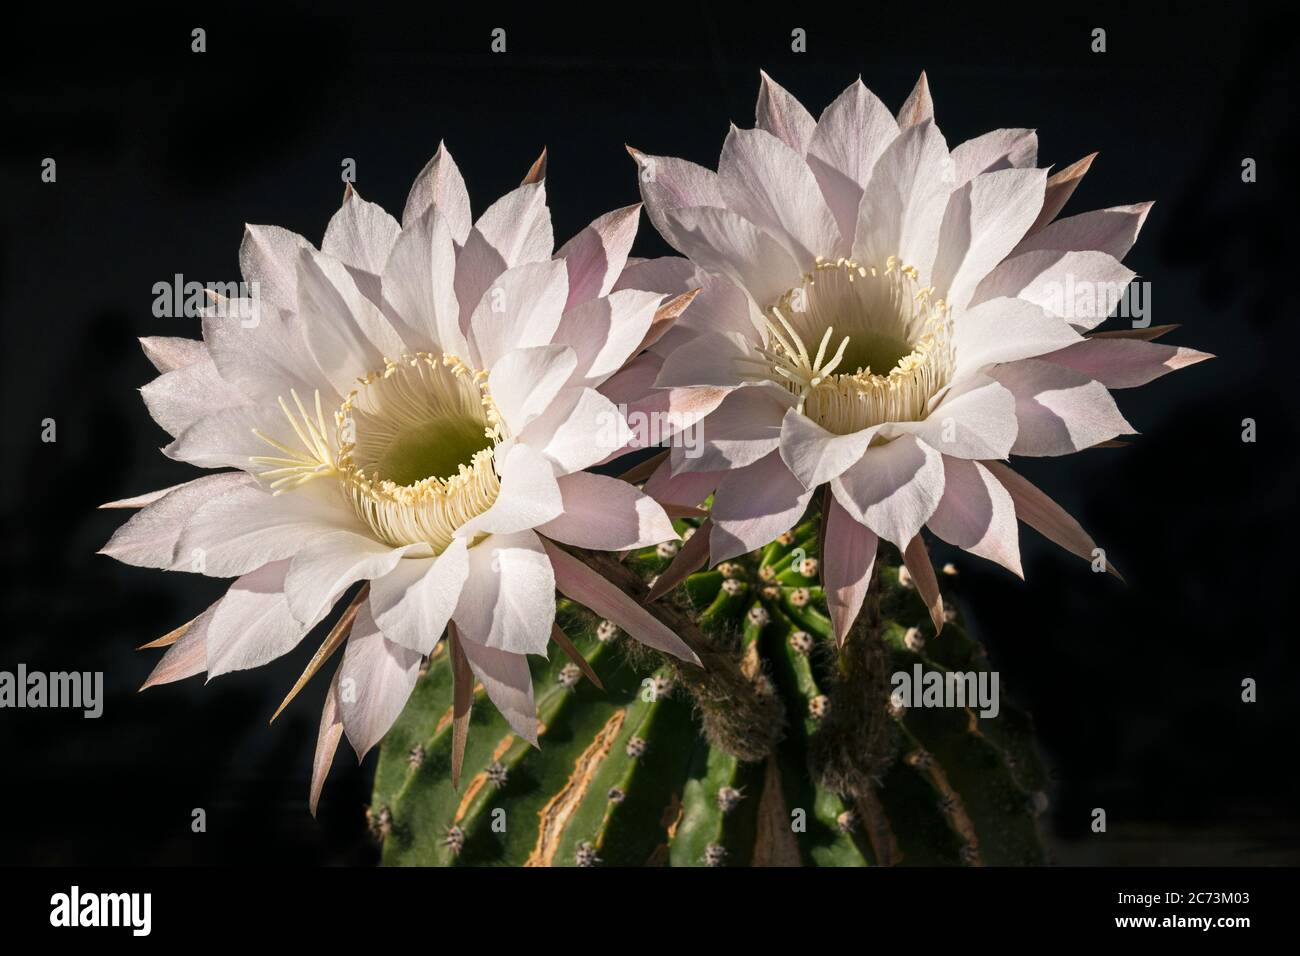 a pair of perfectly exquisite light pink echinopsis tubiflora night blooming cactus flowers rise high above the grungy old plant on a black background Stock Photo